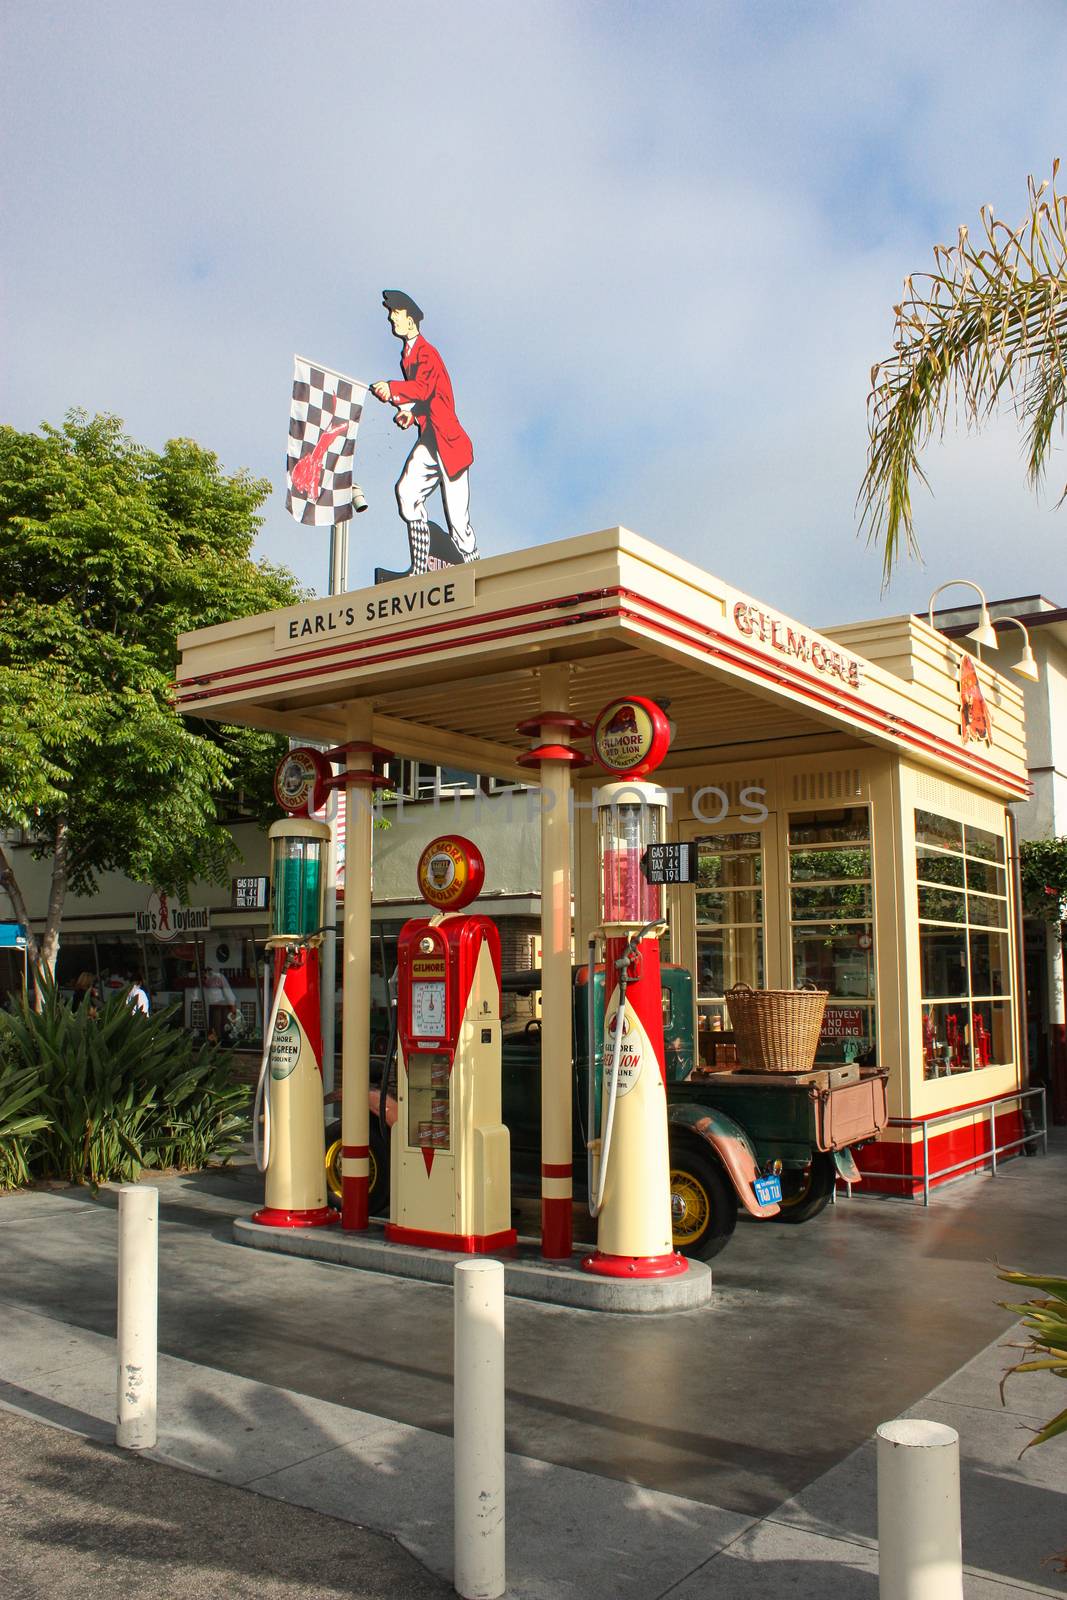 Petrol station in retro style by AndrewBu